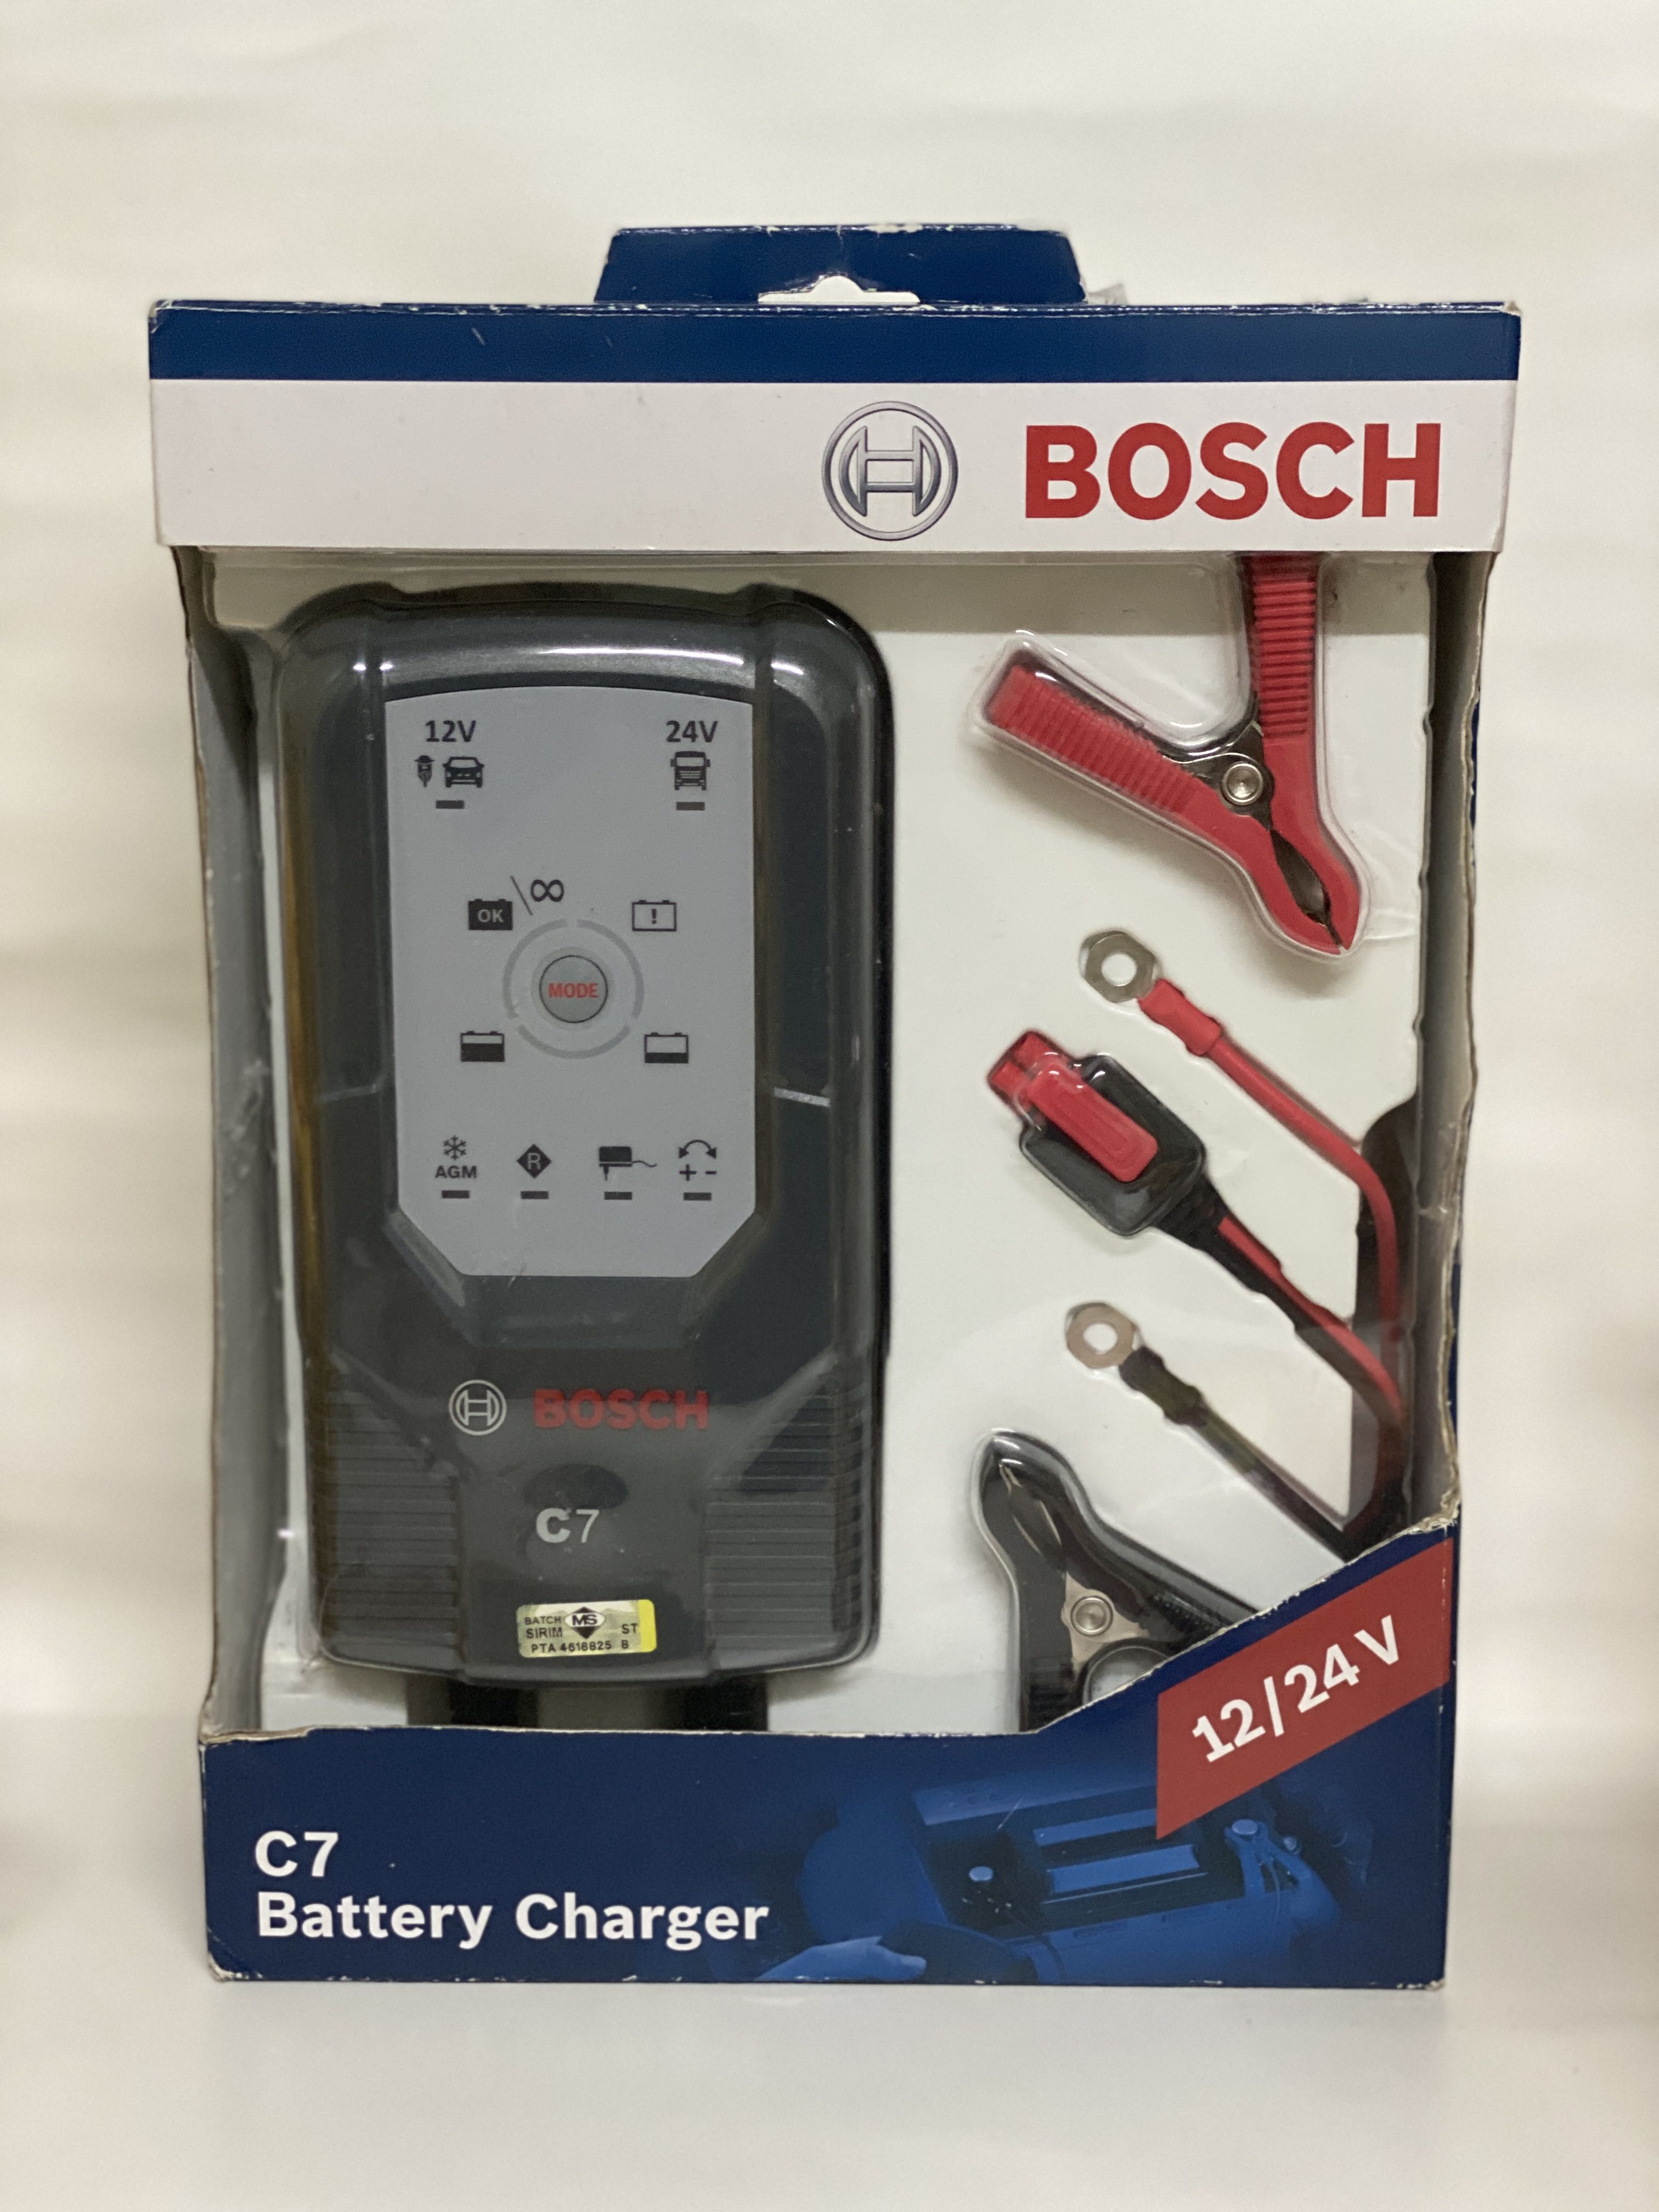 BOSCH C7 Battery Charger (12/24V), Auto Accessories on Carousell